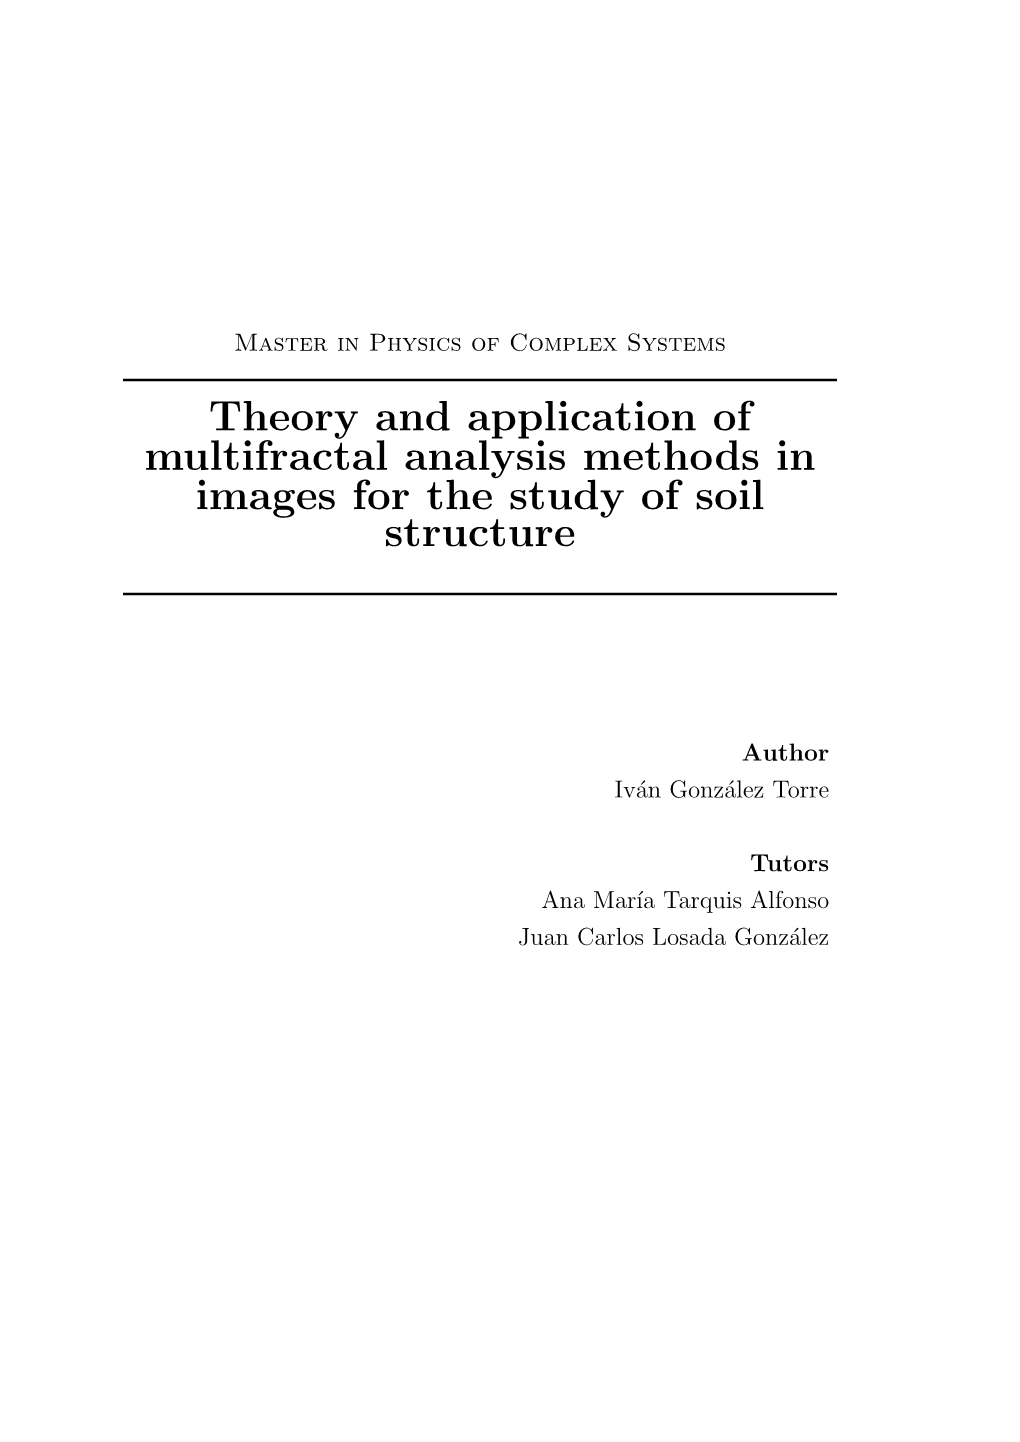 Theory and Application of Multifractal Analysis Methods in Images for the Study of Soil Structure